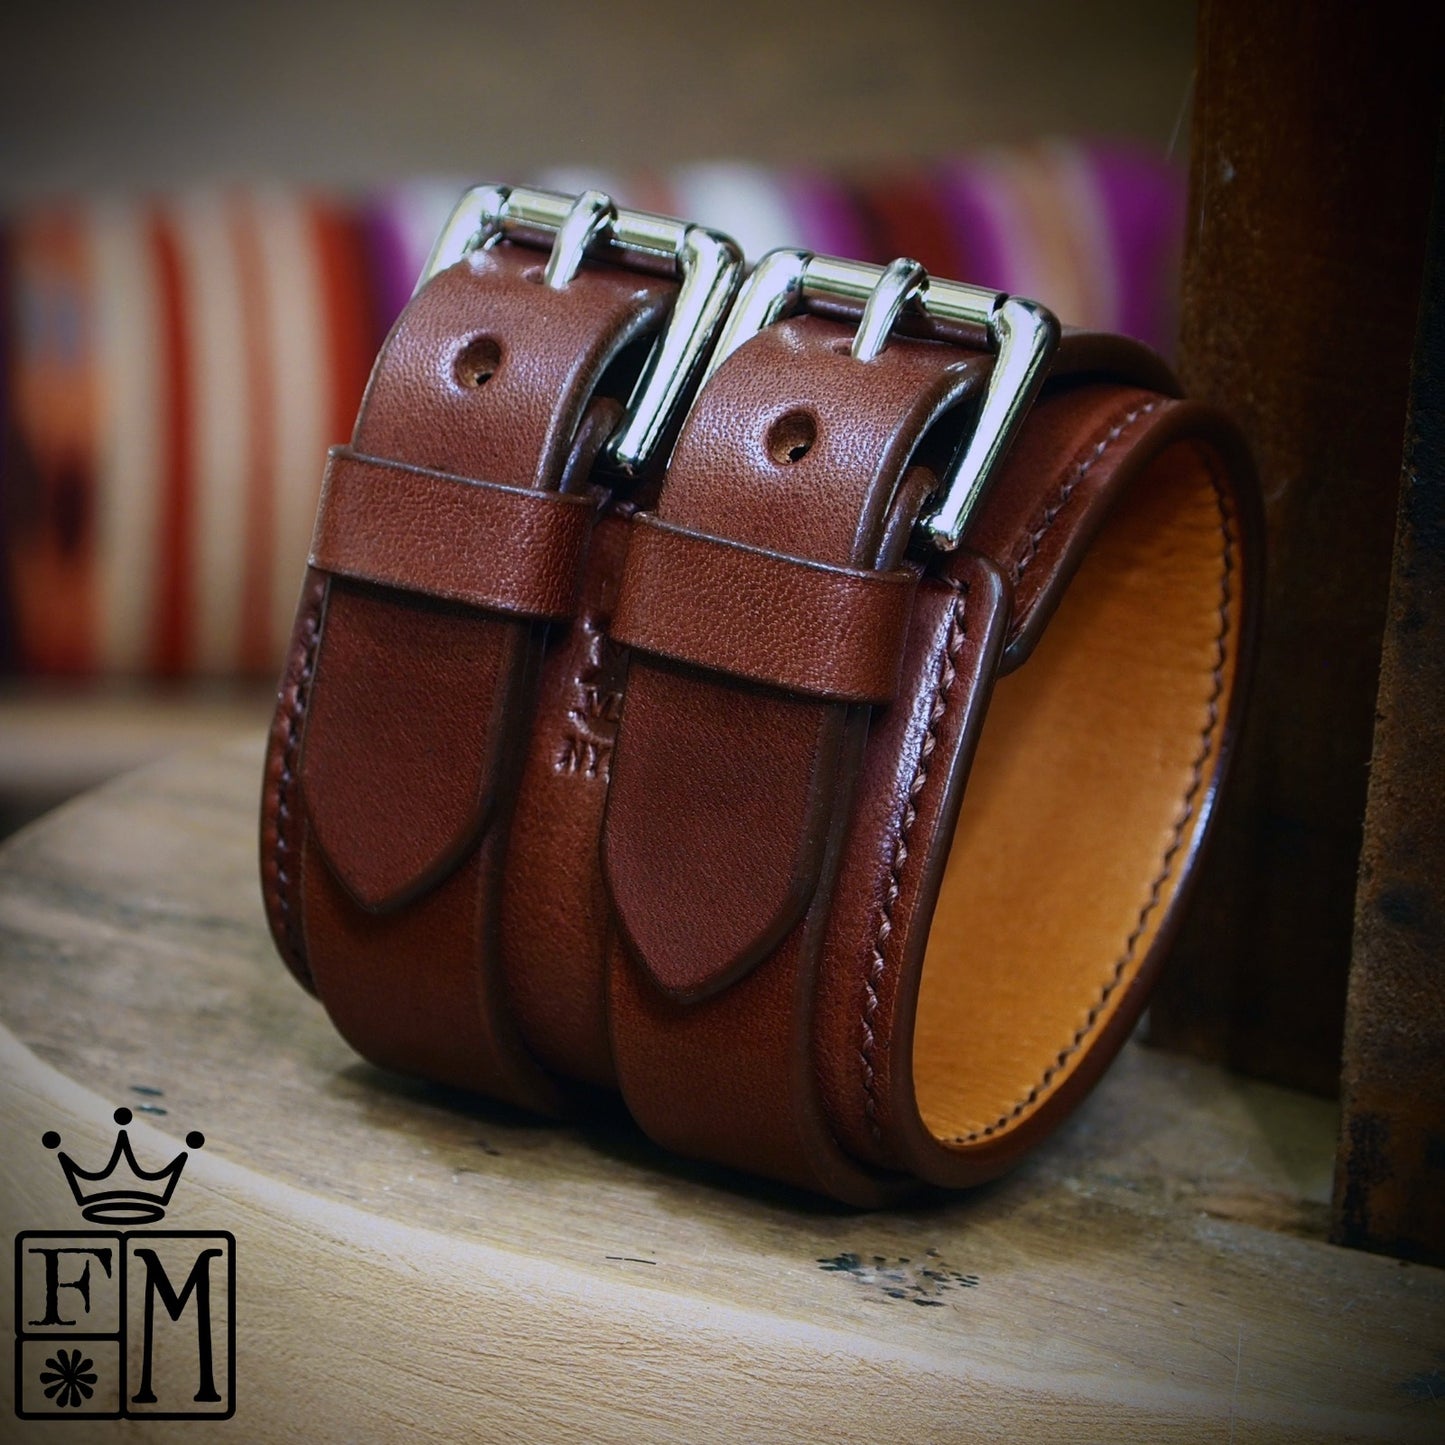 2.5" brown double strap cuff handstiched and lined luxury!